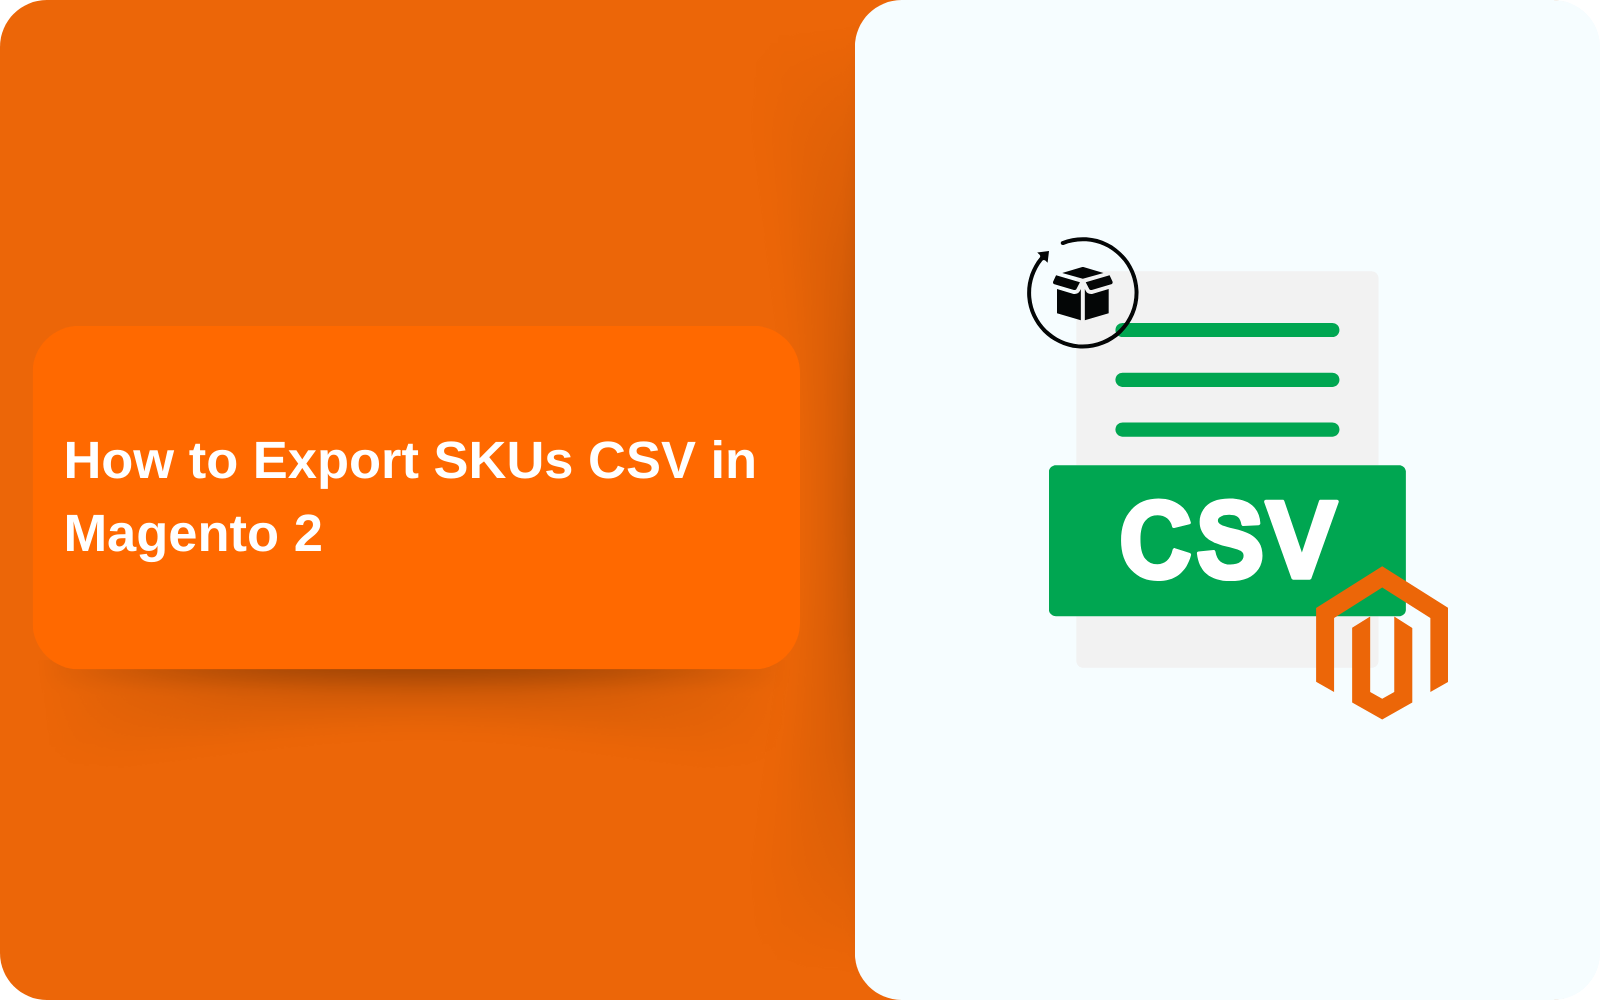 How to Export SKUs CSV in Magento 2